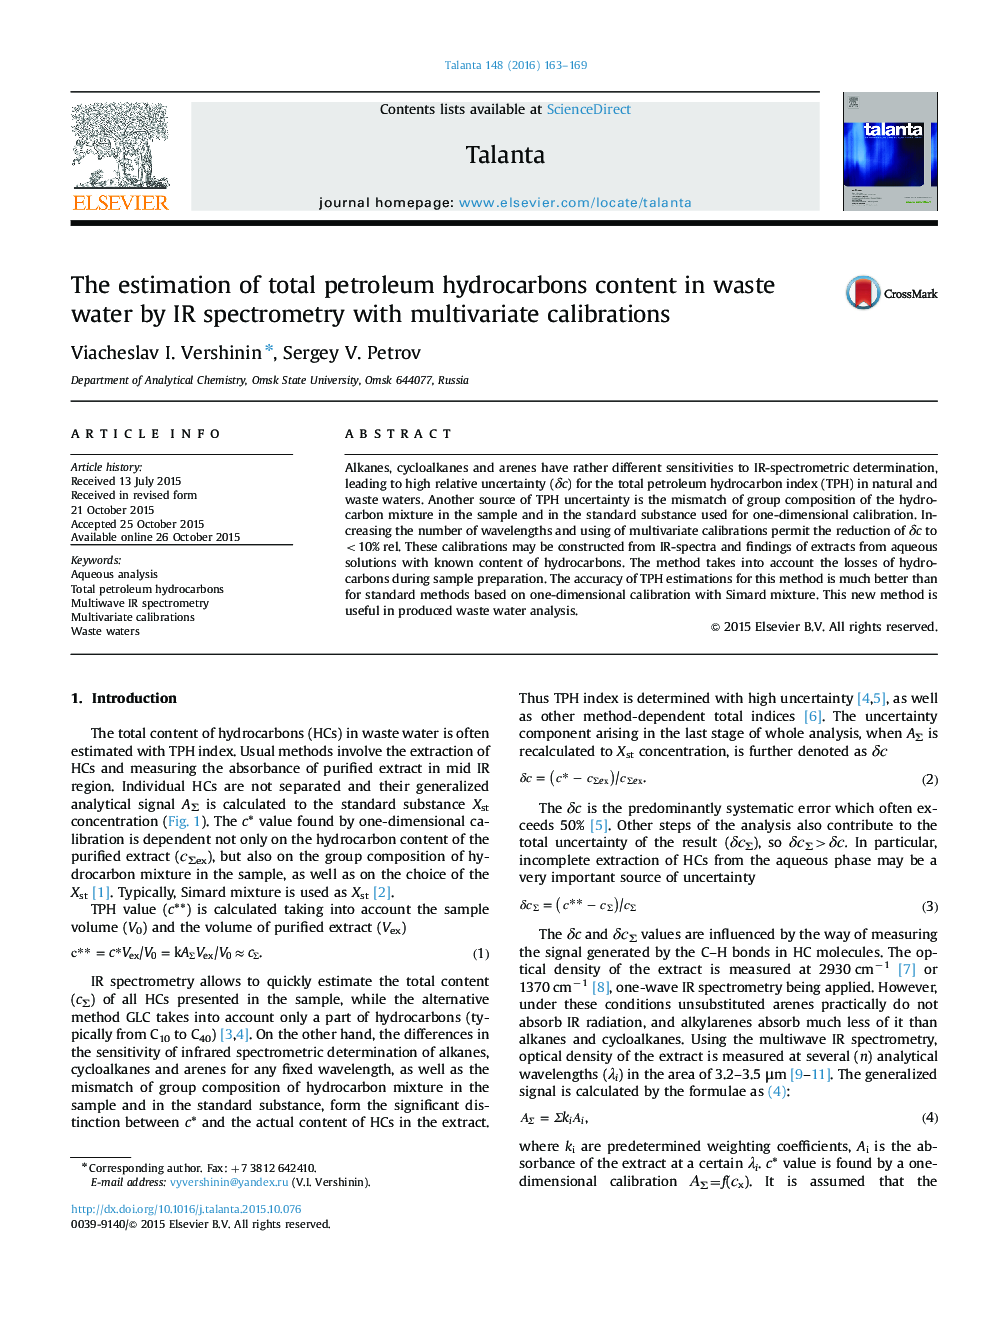 The estimation of total petroleum hydrocarbons content in waste water by IR spectrometry with multivariate calibrations